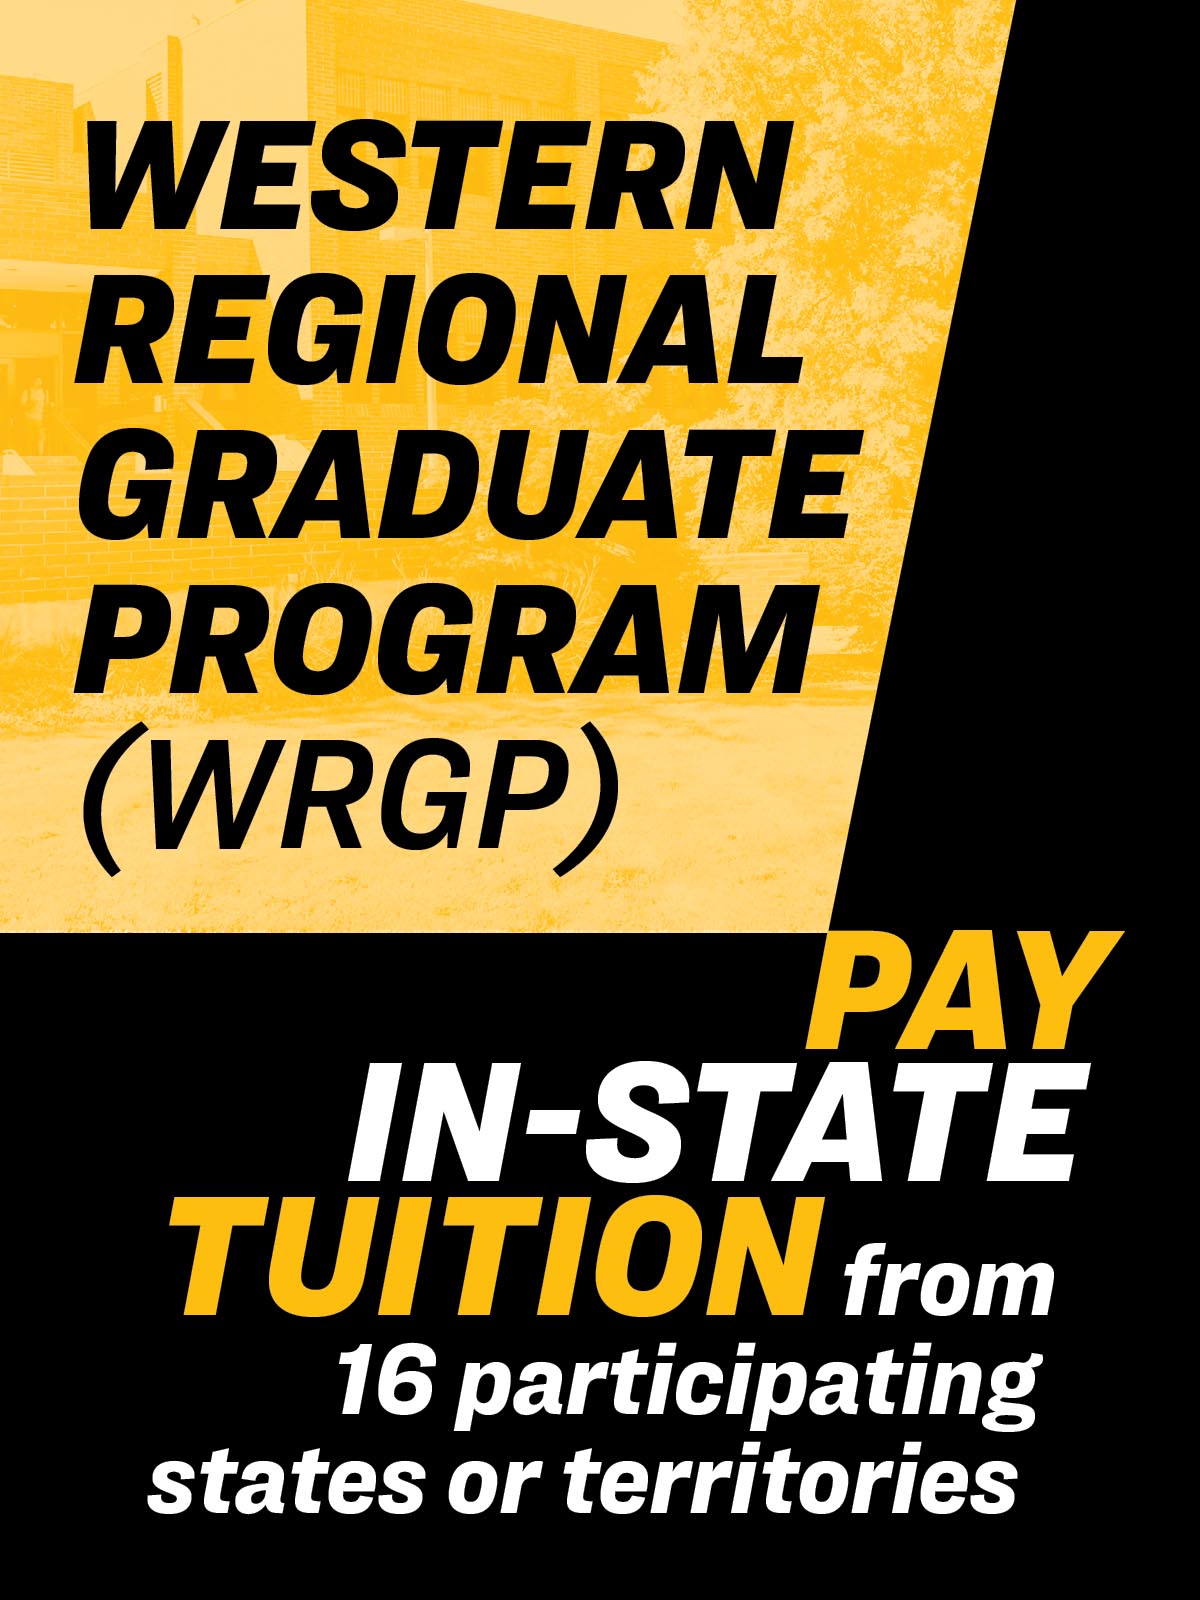 Pay in-state tuition from states or territories within the Western Regional Graduate Program